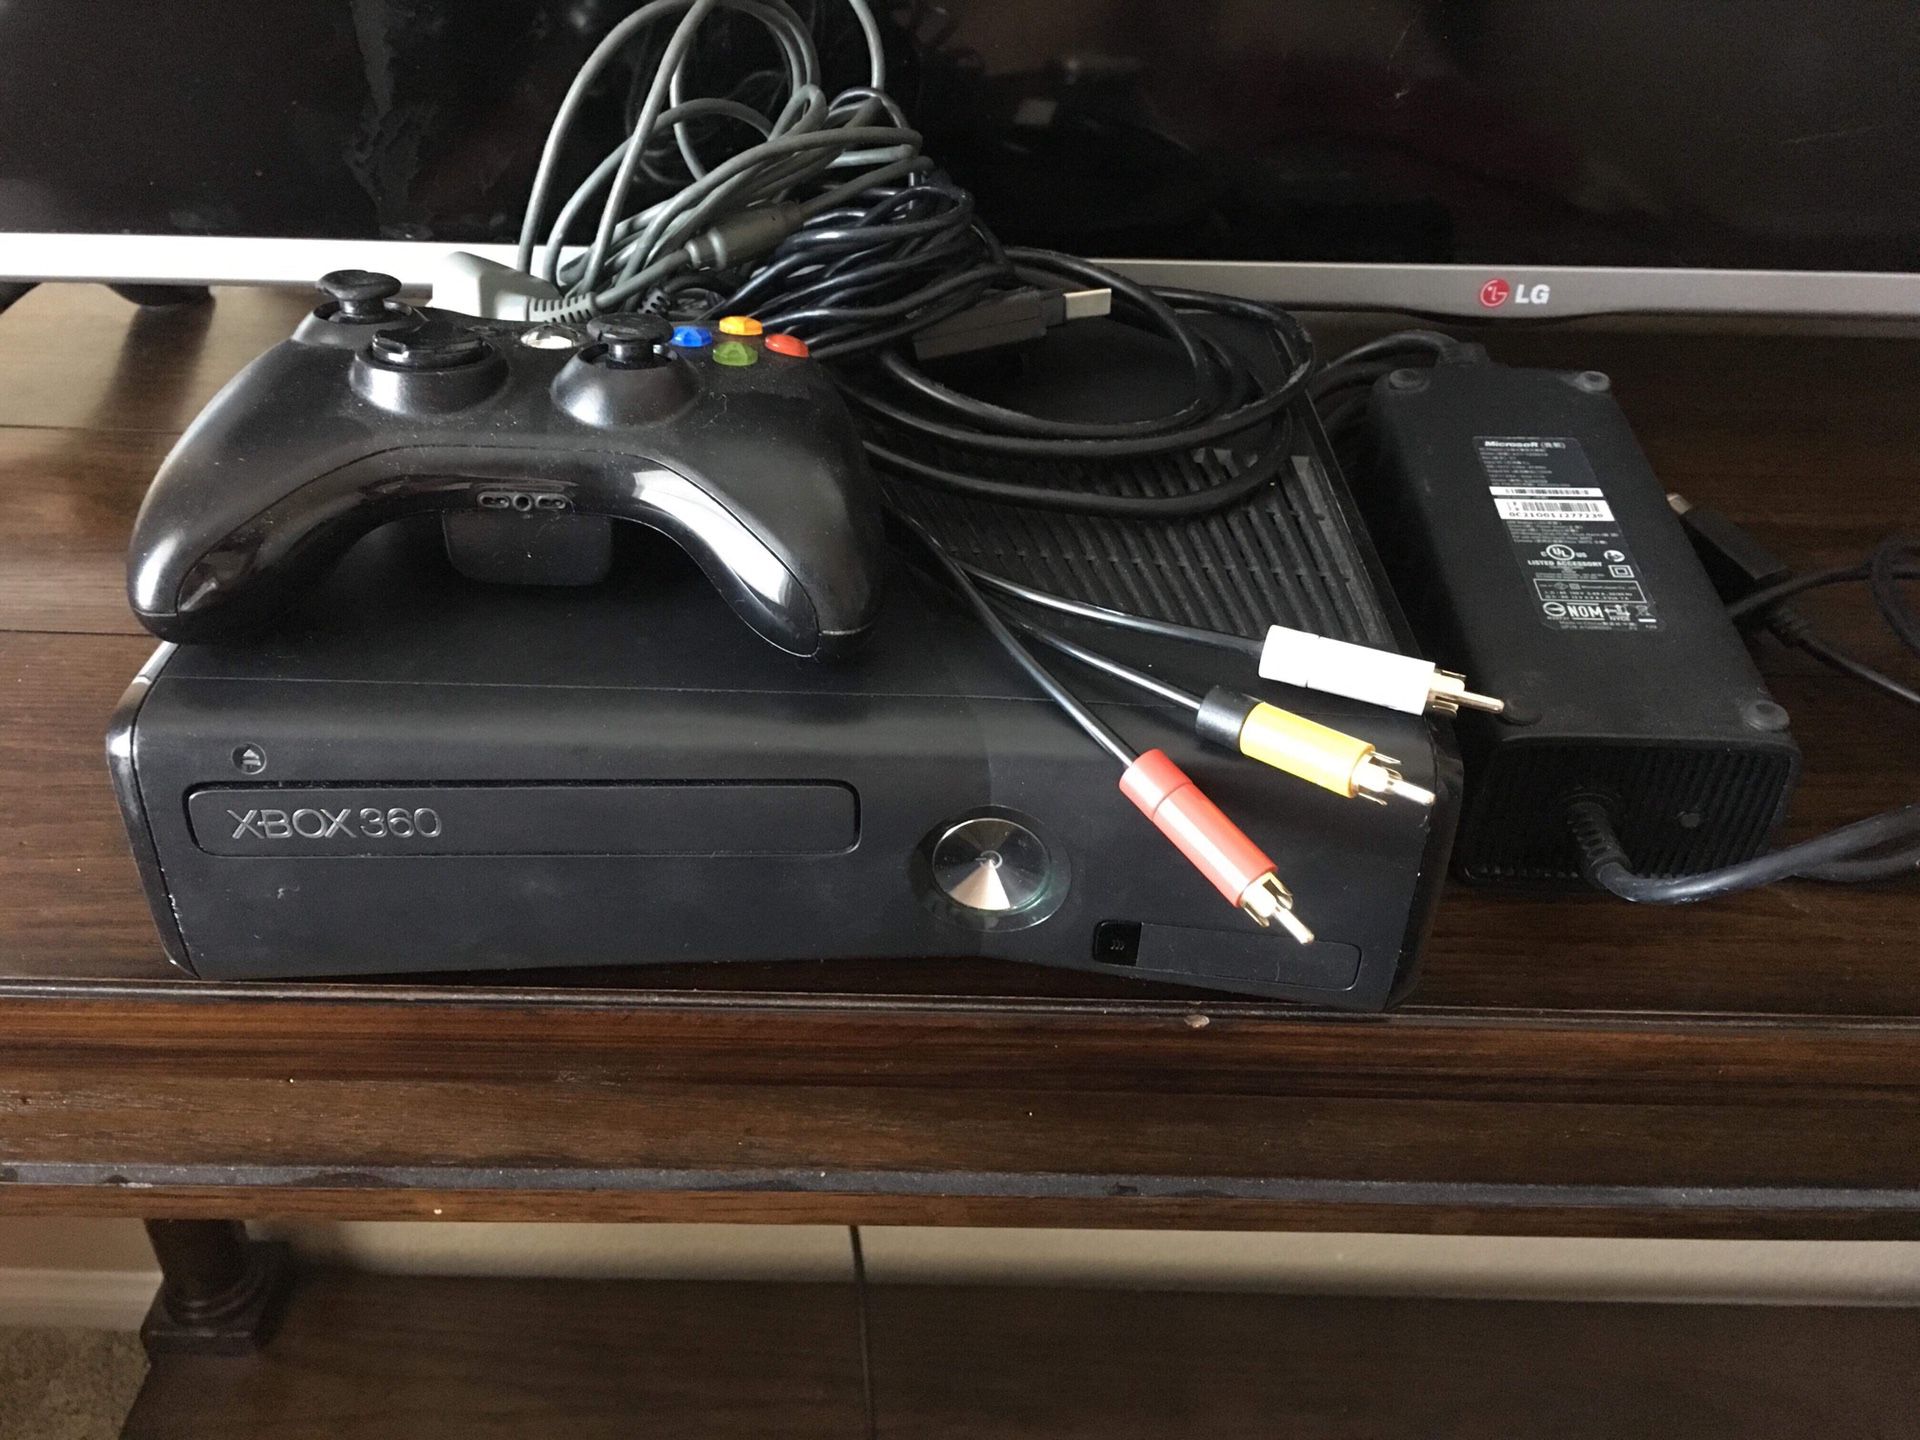 Black Xbox 360 slim with a 250 GB hardrive and new controller and controller chargers